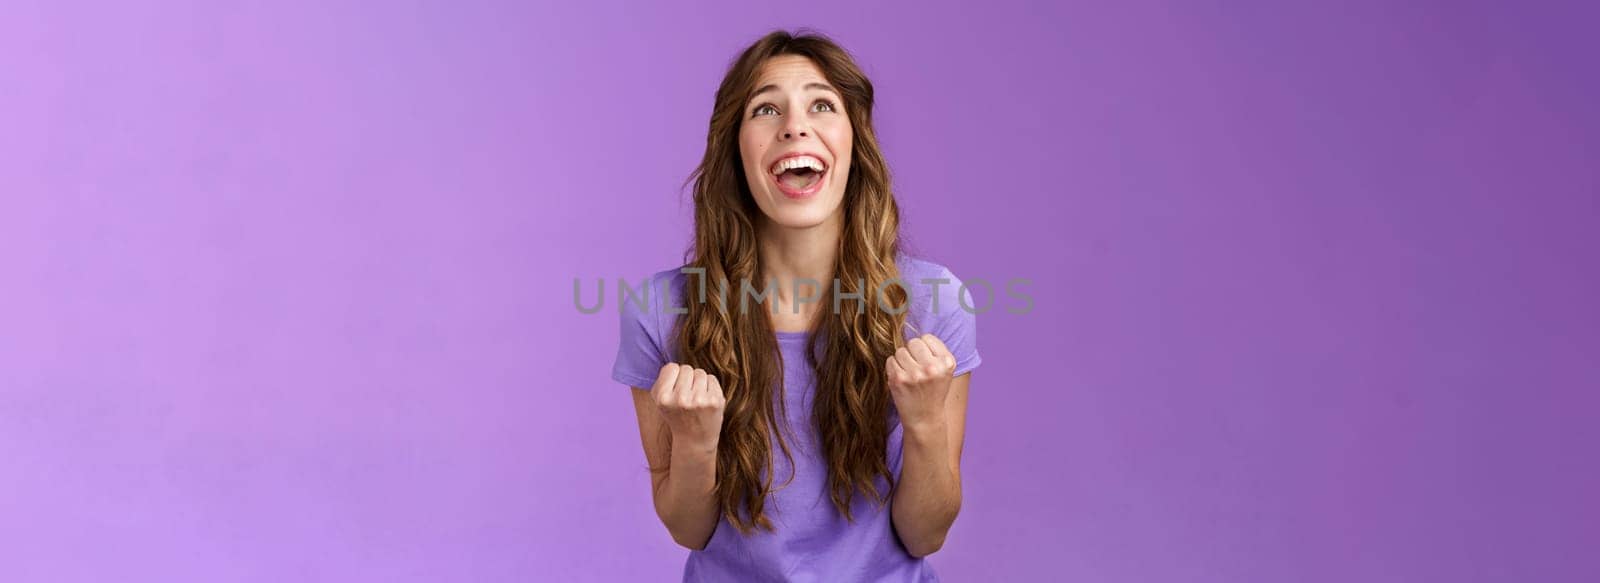 Relieved happy girl thank god awesome achievement celebrate success implore lord grateful fist pump yelling raise head up sky triumphing good news stand purple background joyful positive reaction. Lifestyle.